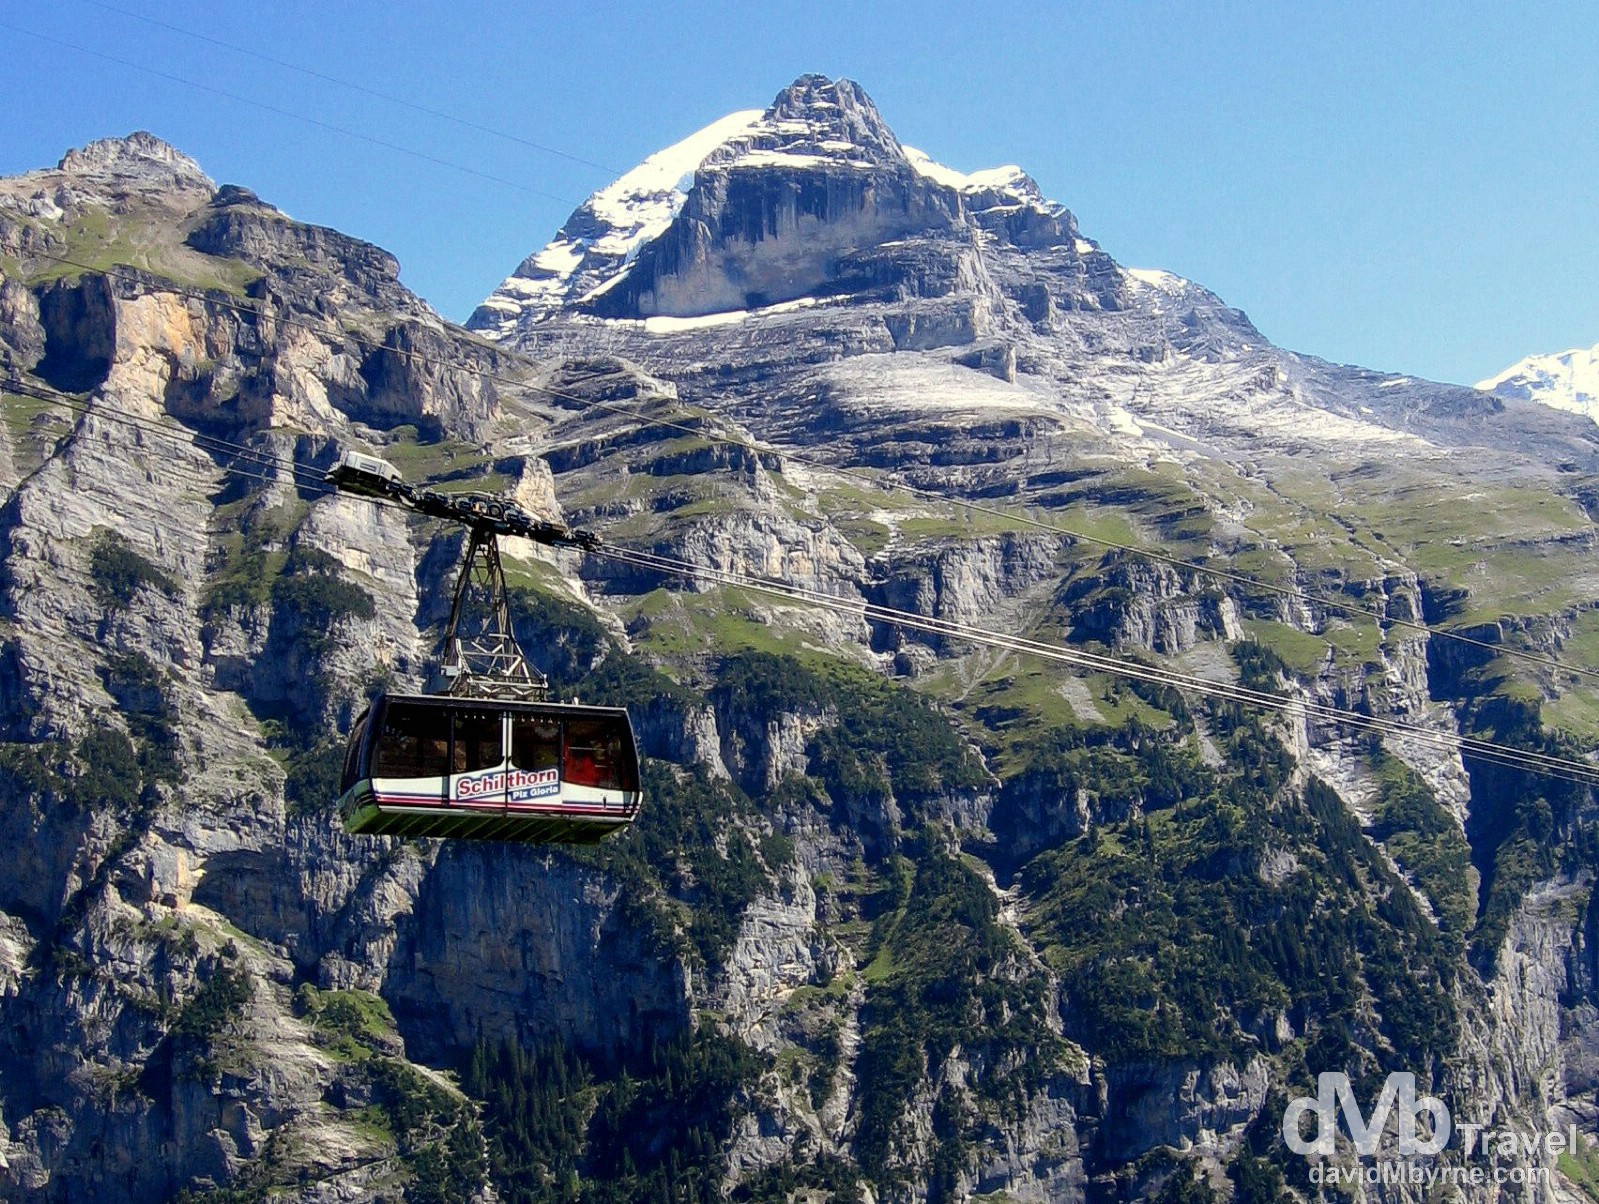 The Schilthorn Cable Car in the Jungfrau region of the Swiss Alps, Switzerland. August 25th, 2007.